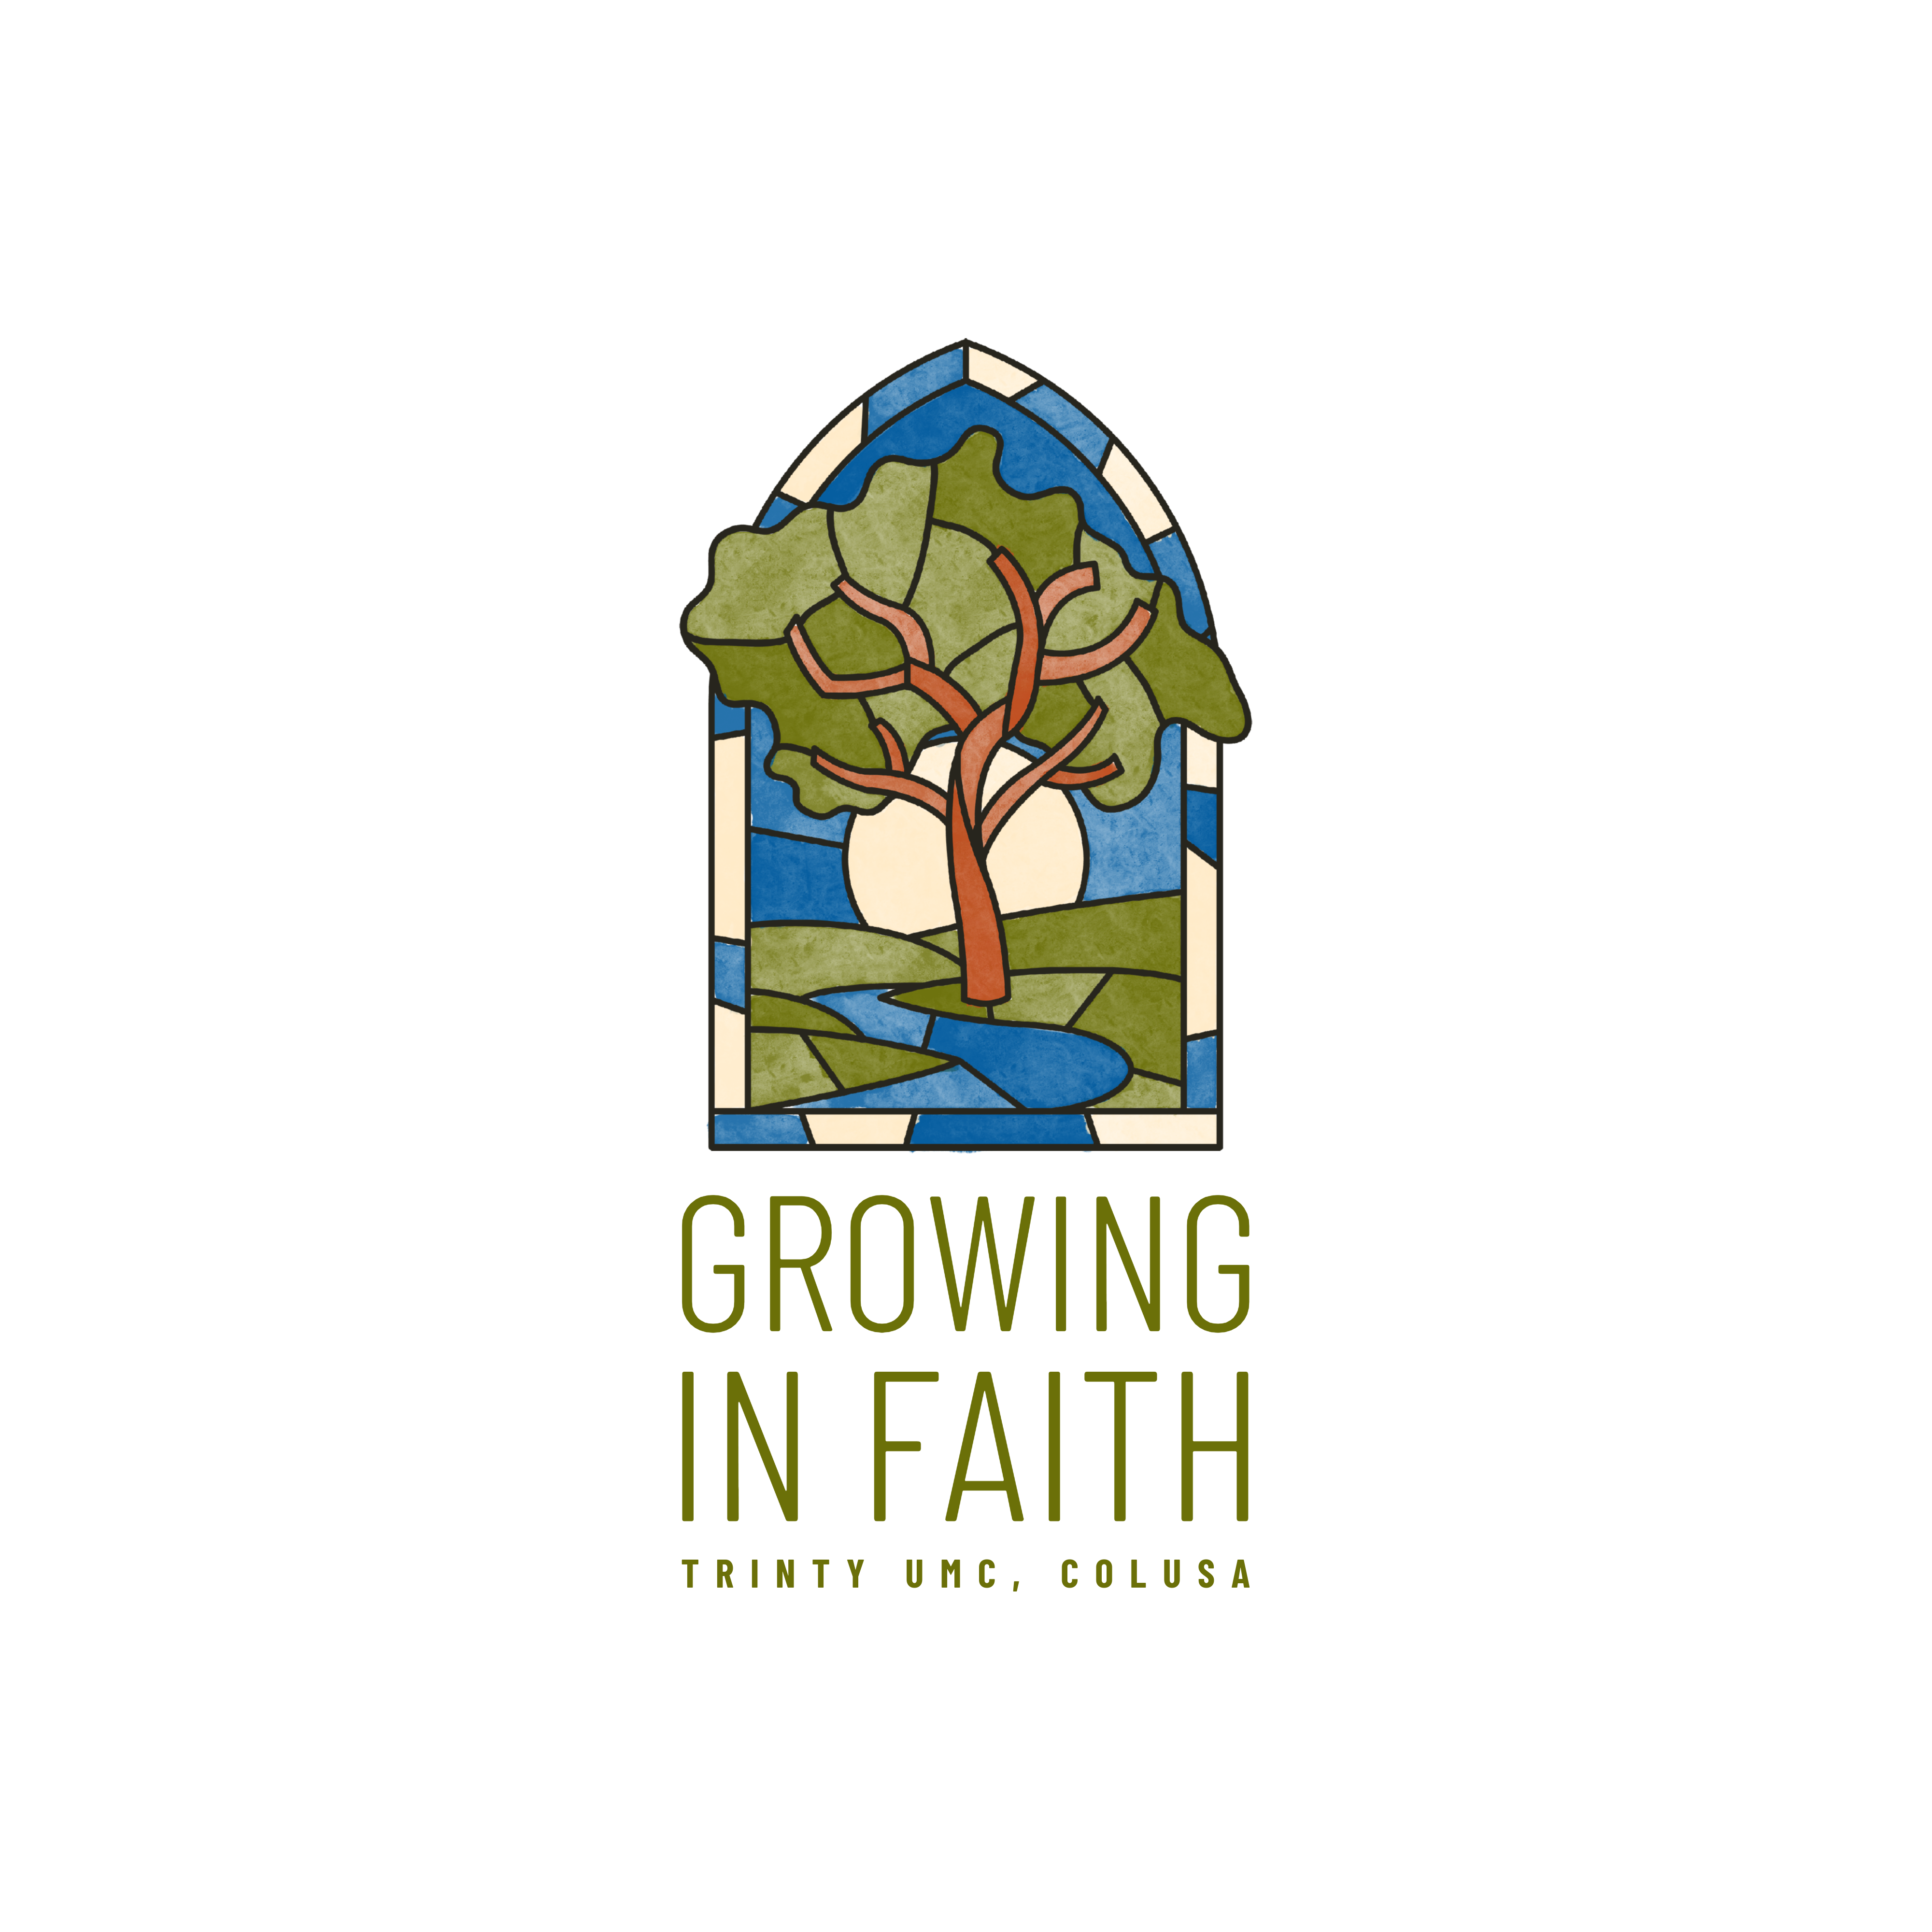 Growing In Faith Logo of Tree in Stained Glass